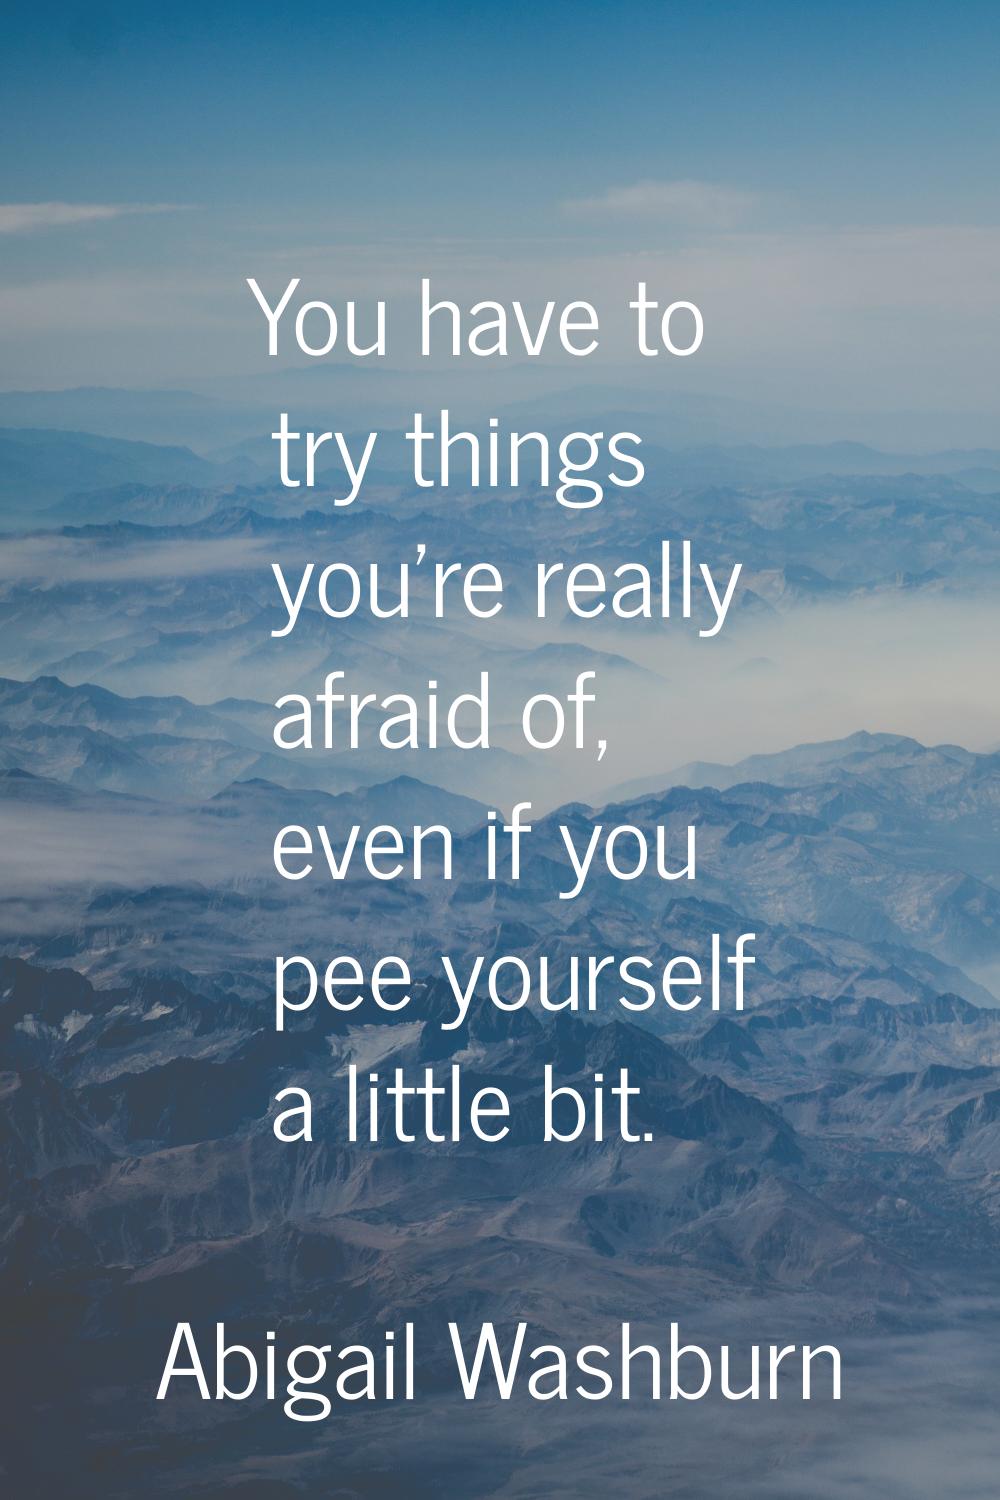 You have to try things you're really afraid of, even if you pee yourself a little bit.